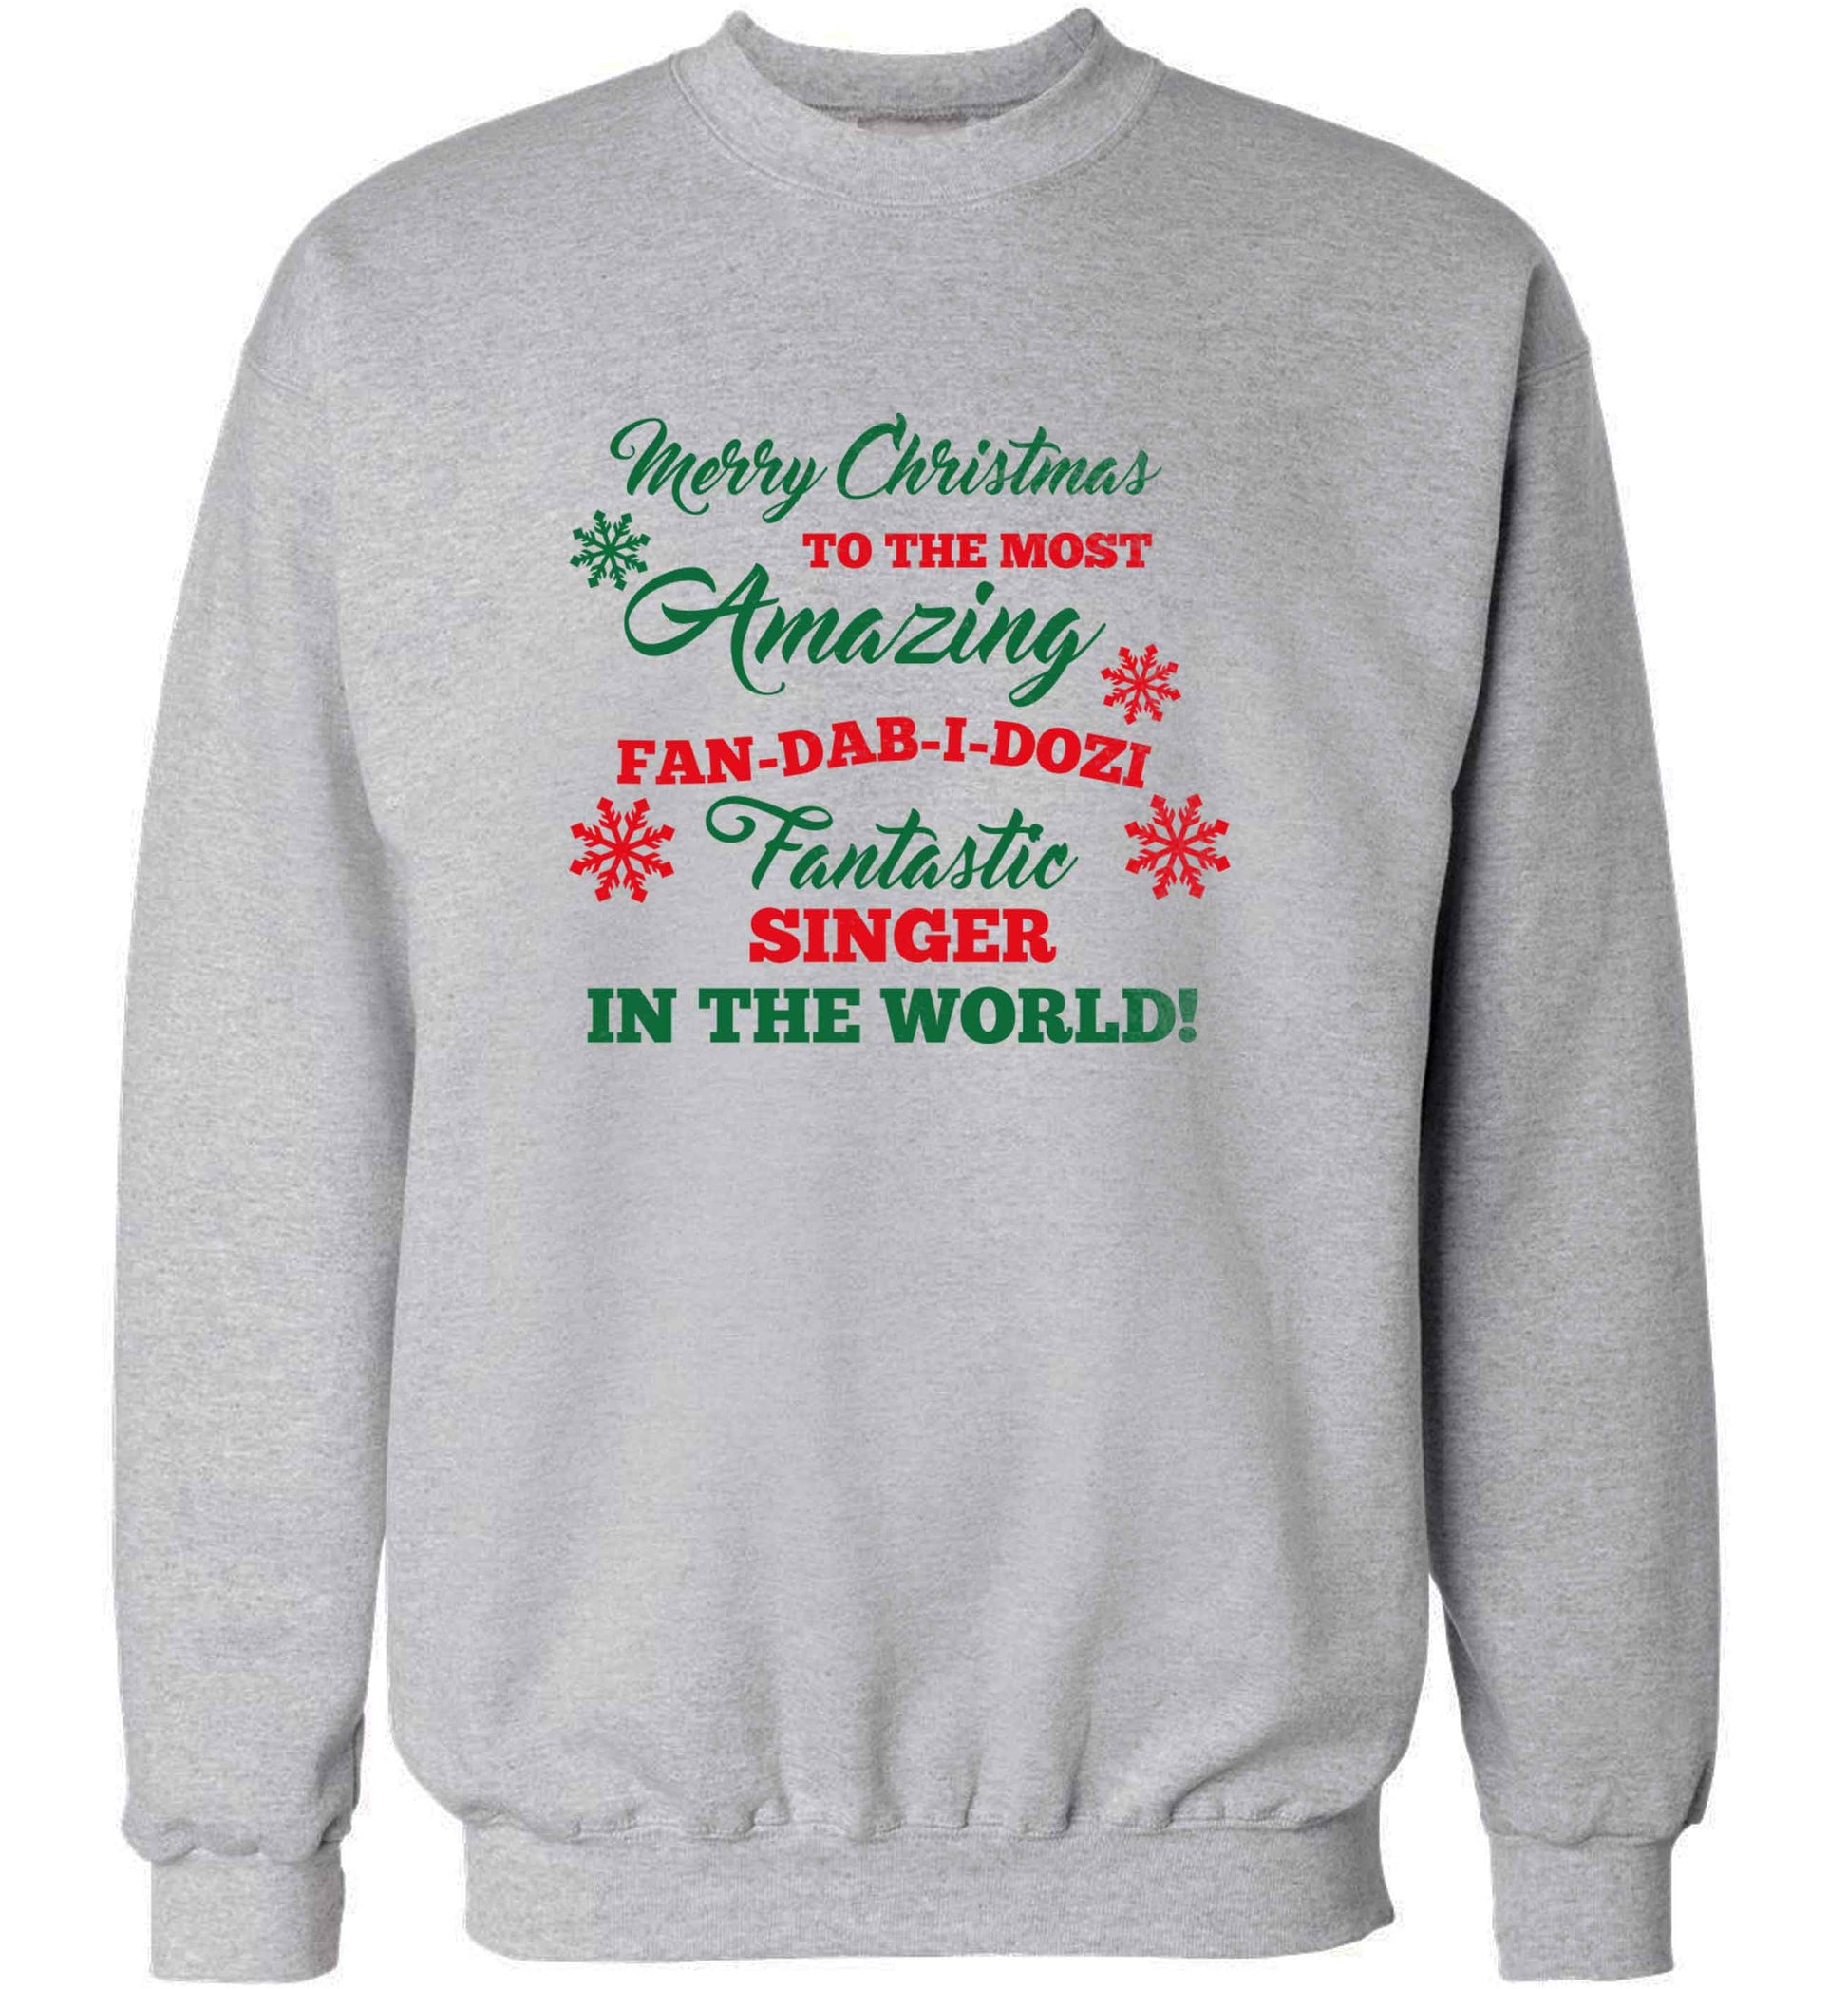 Merry Christmas to the most amazing singer in the world! adult's unisex grey sweater 2XL